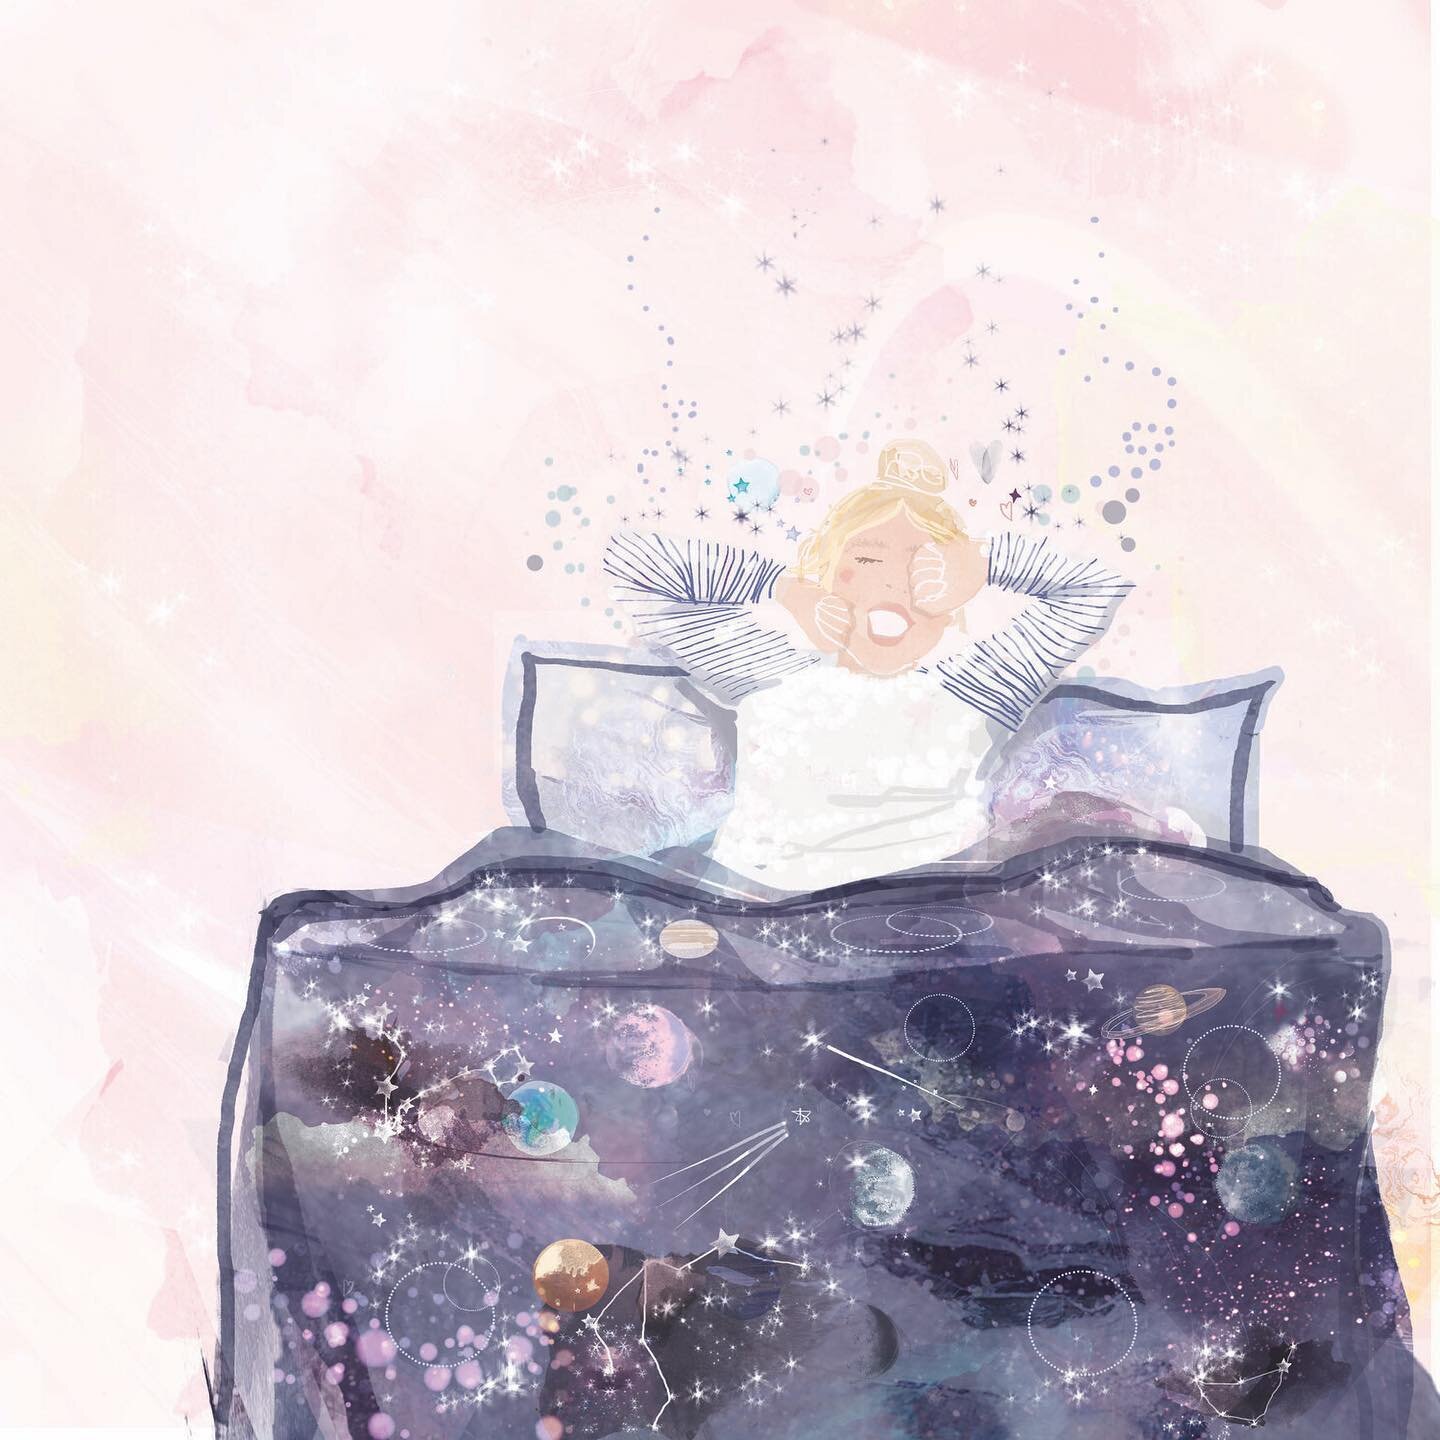 Happy bank holiday weekend lovelies&hellip; here&rsquo;s to Sundays that feel like Saturdays and magic Monday lie ins ✨✨

Channelling these sleepy vibes from the gorgeous mini manifester book coming soon by @abigailsimmonds 🤍✨

#minimanifester #long